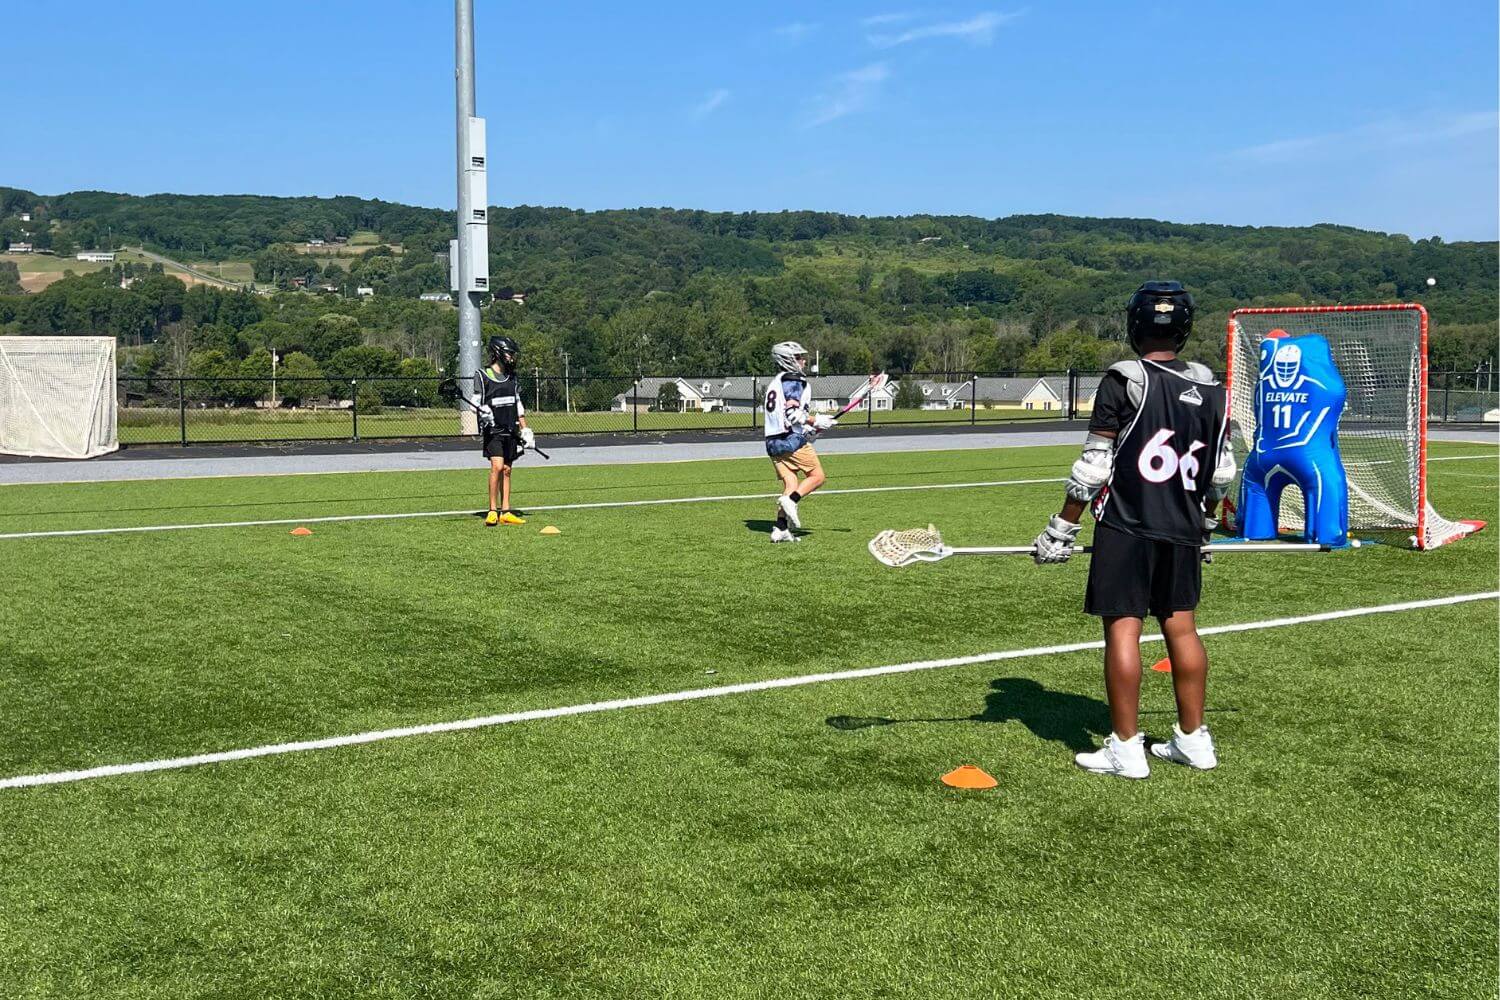 Boys lacrosse practice at summer camp